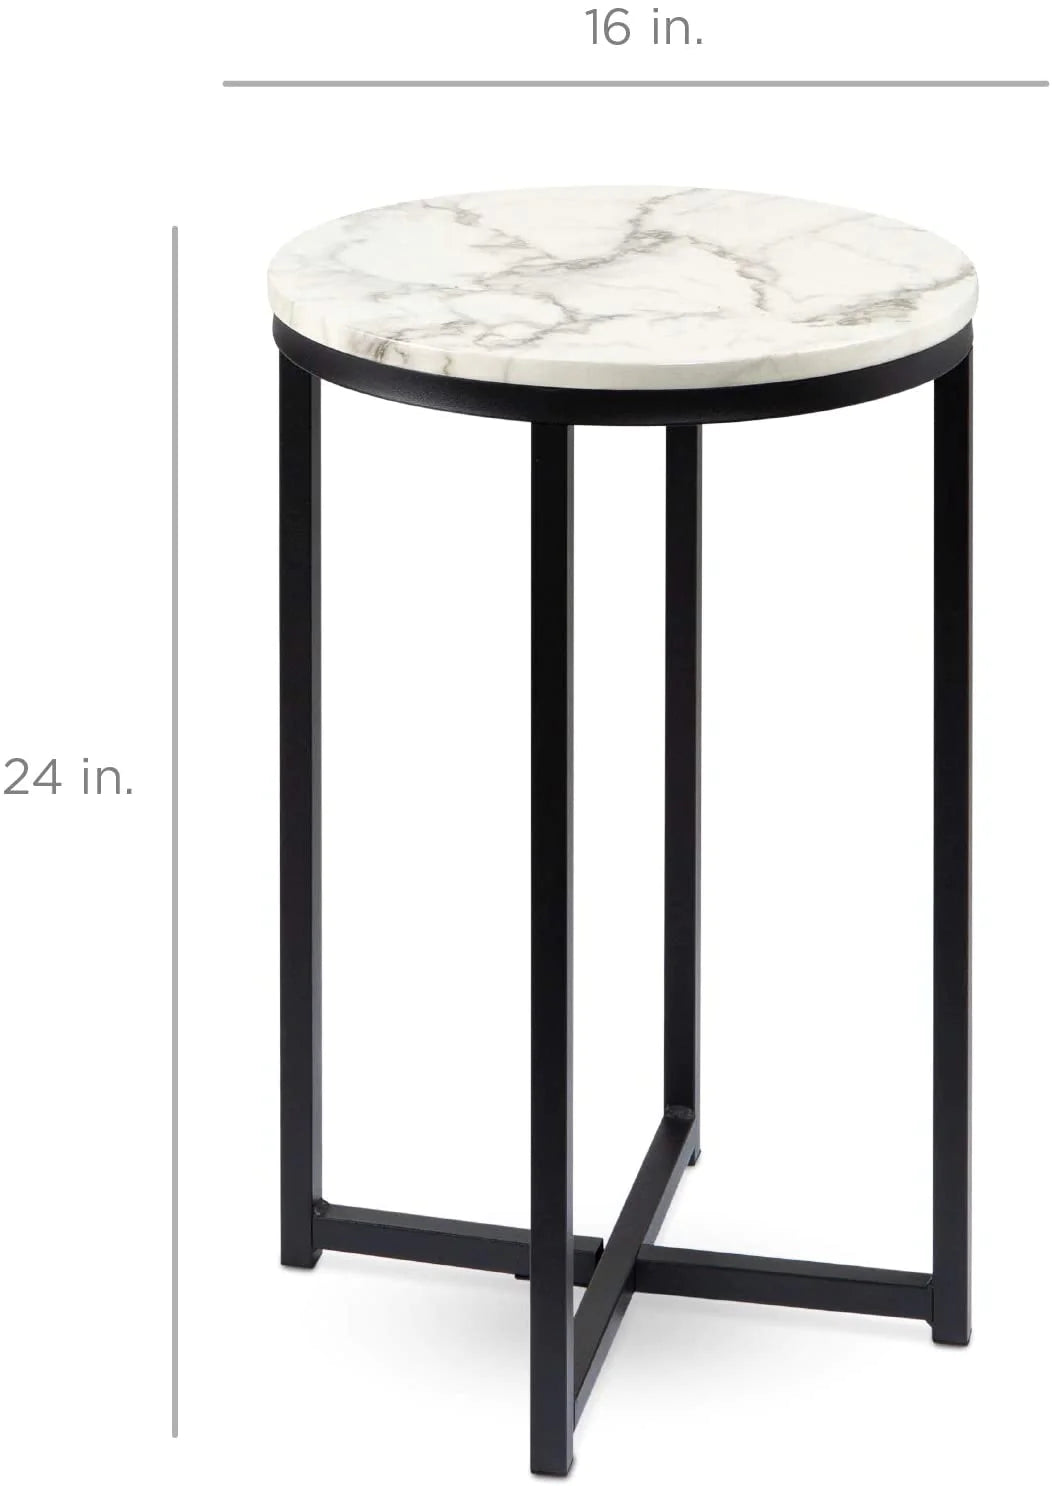 Side Table : Modern Small Accent for Living Room, Dining Room